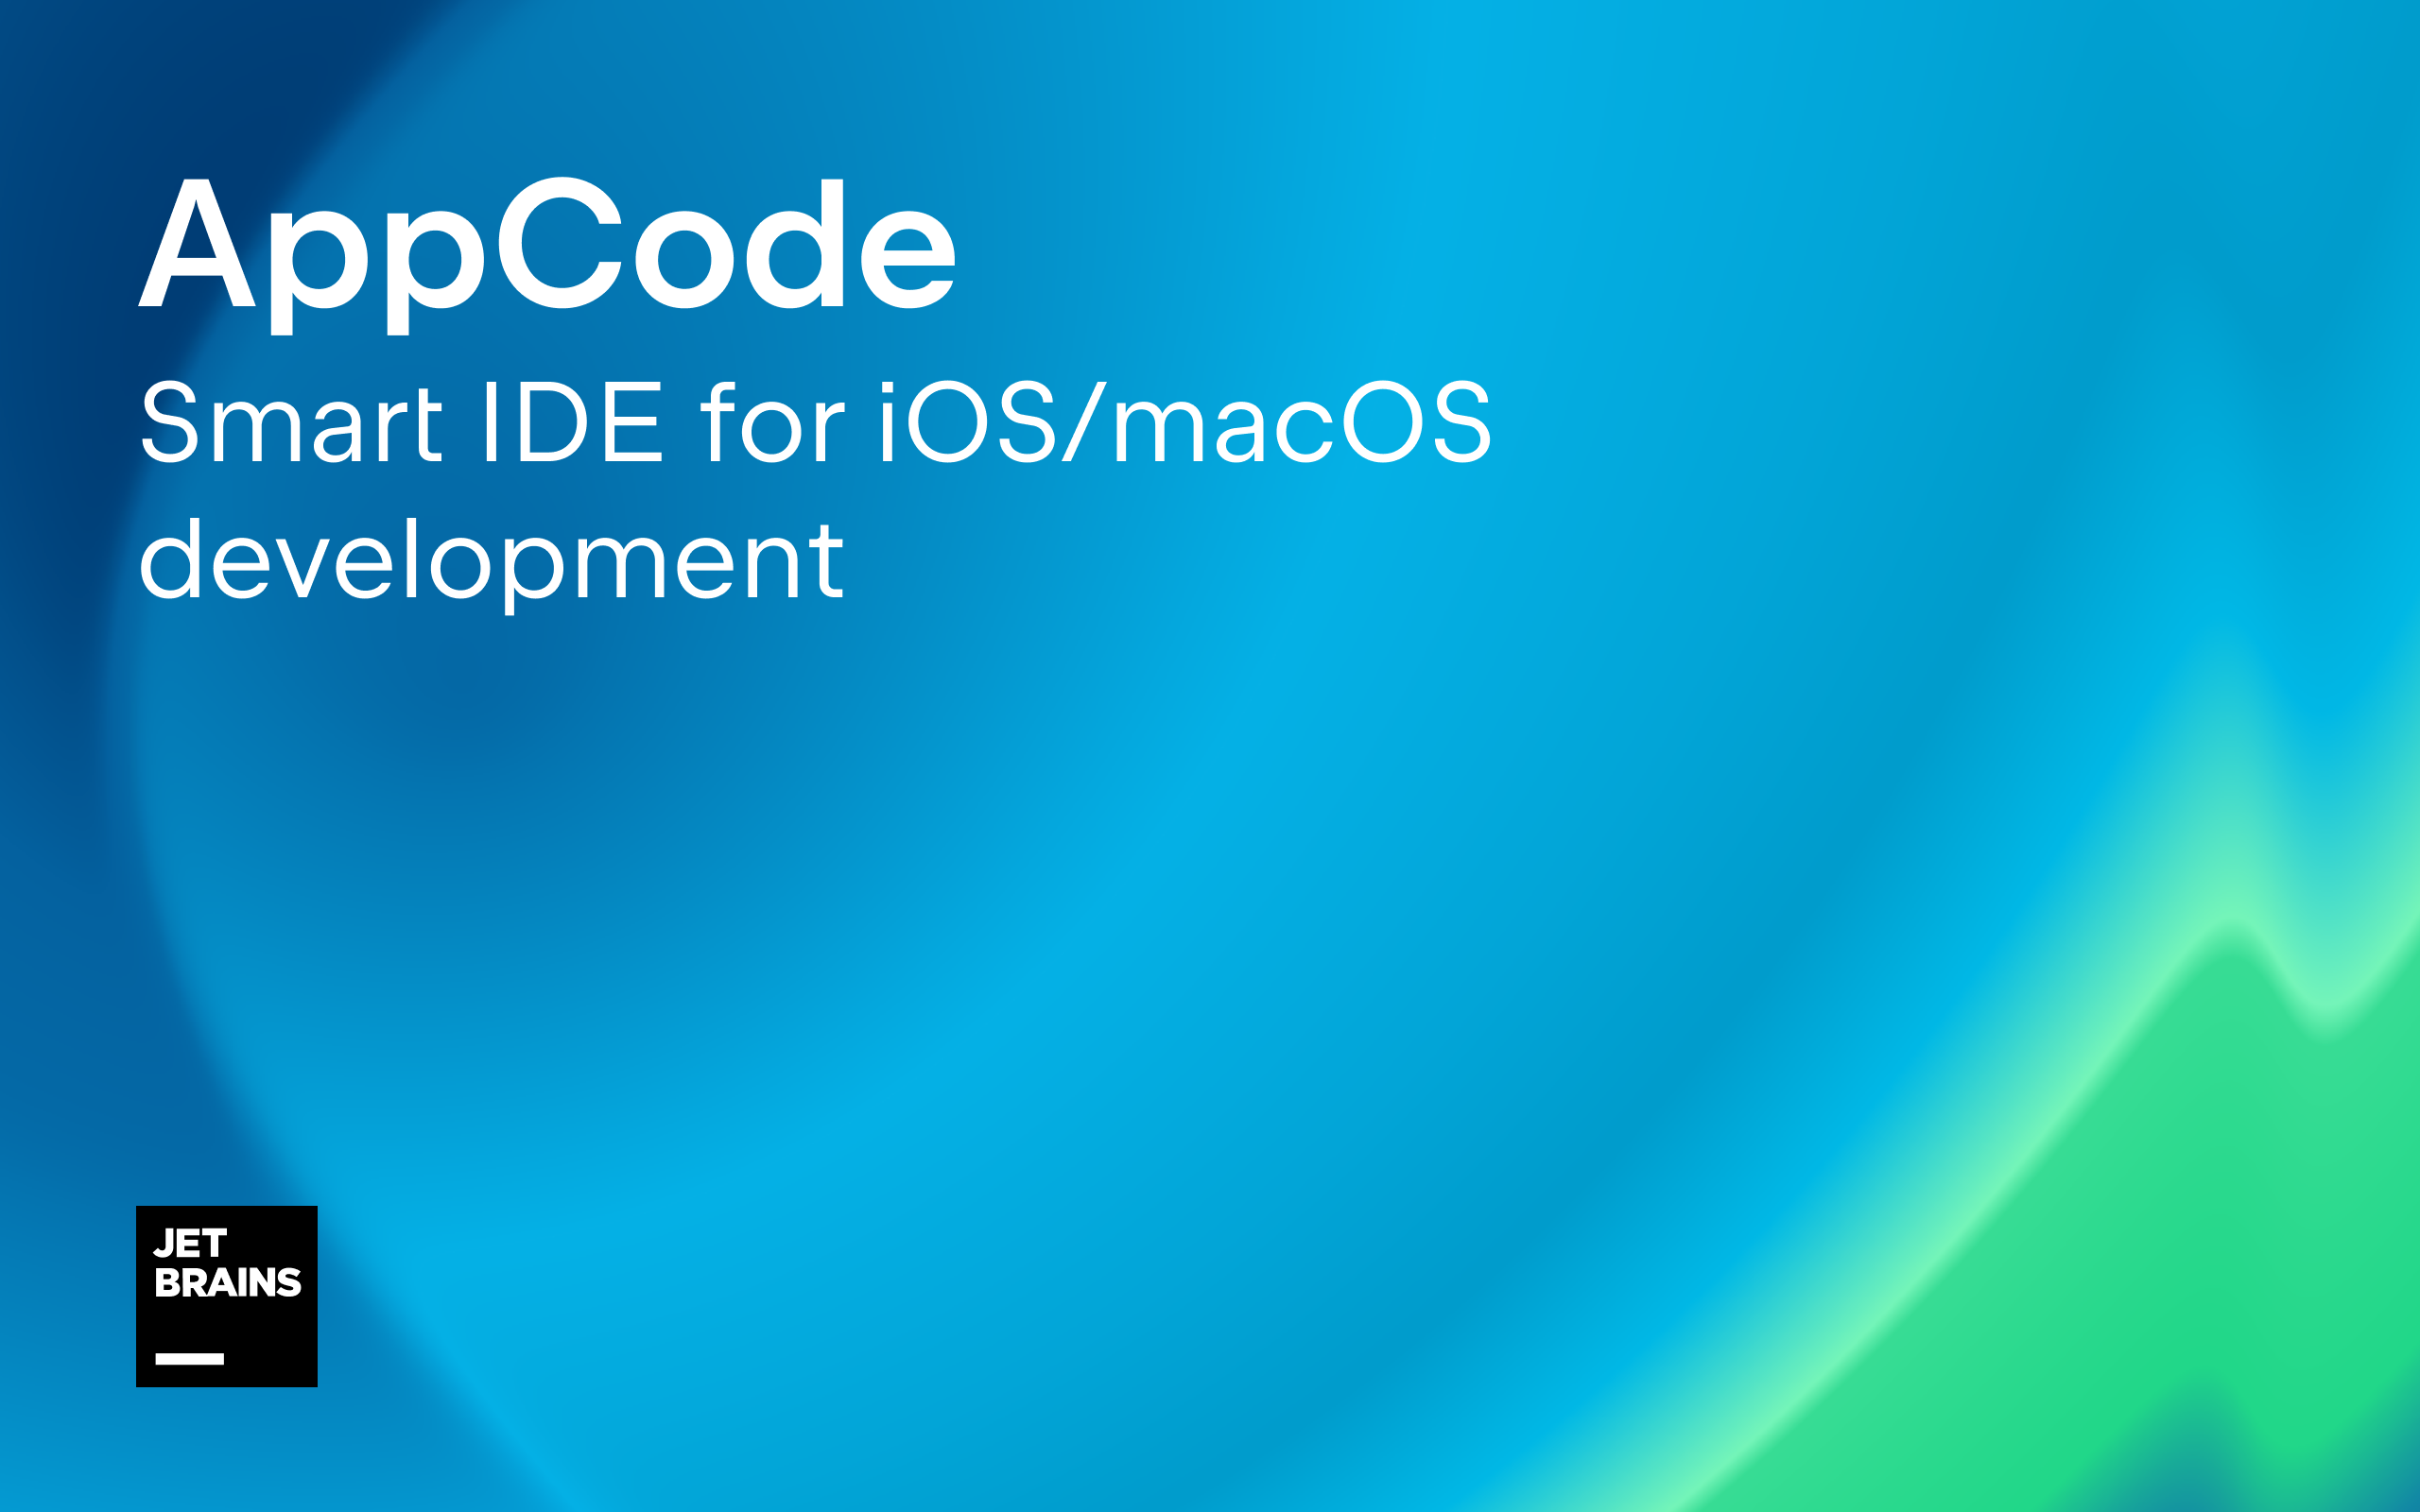 AppCode download the new version for mac